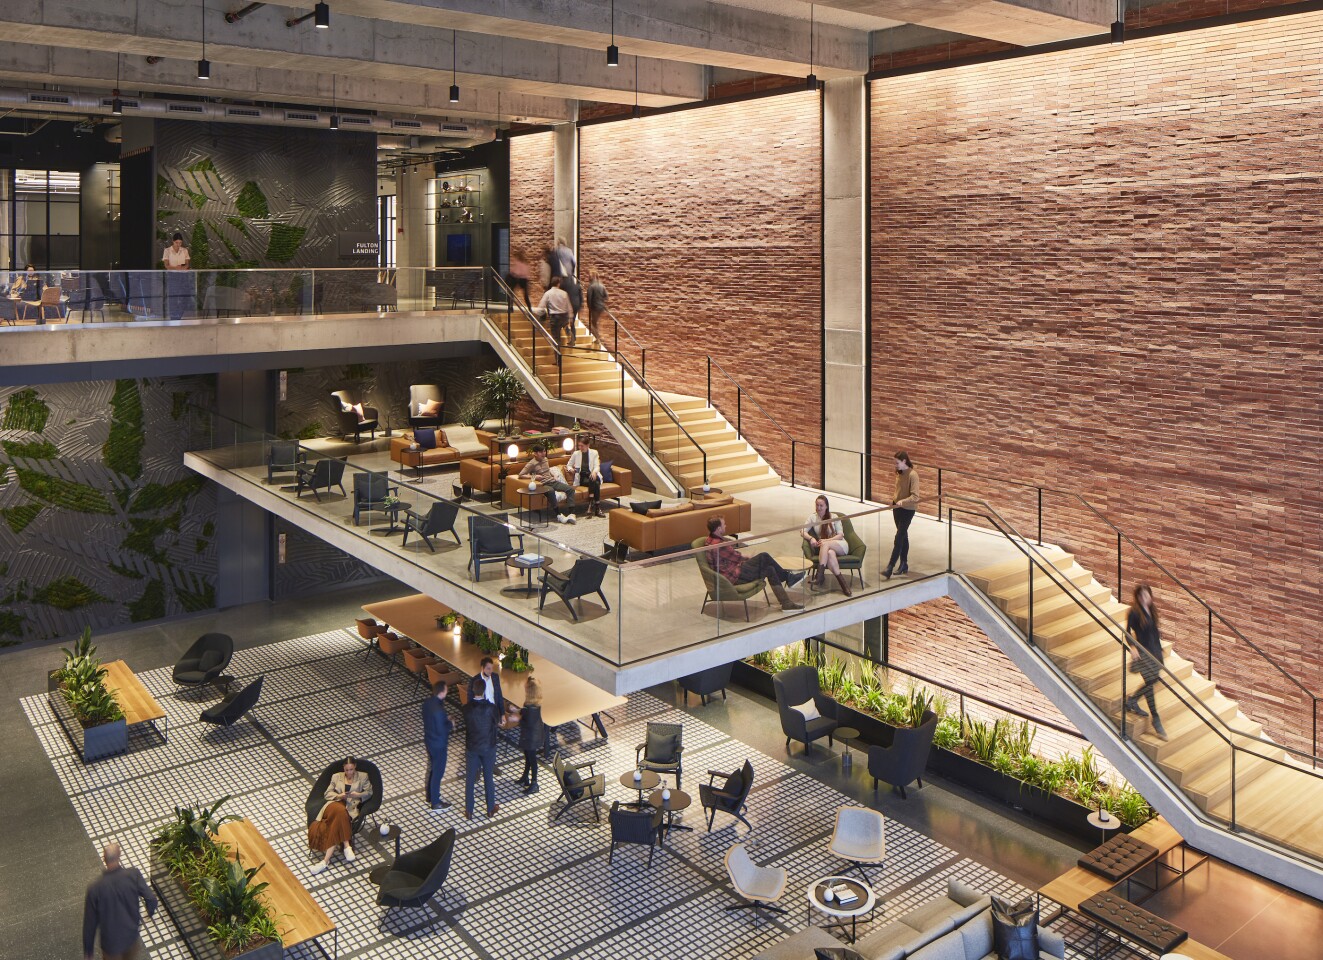 800 Fulton Market's entrance hosts a triple-height lobby with an eye-catching cantilevered staircase and mezzanine area